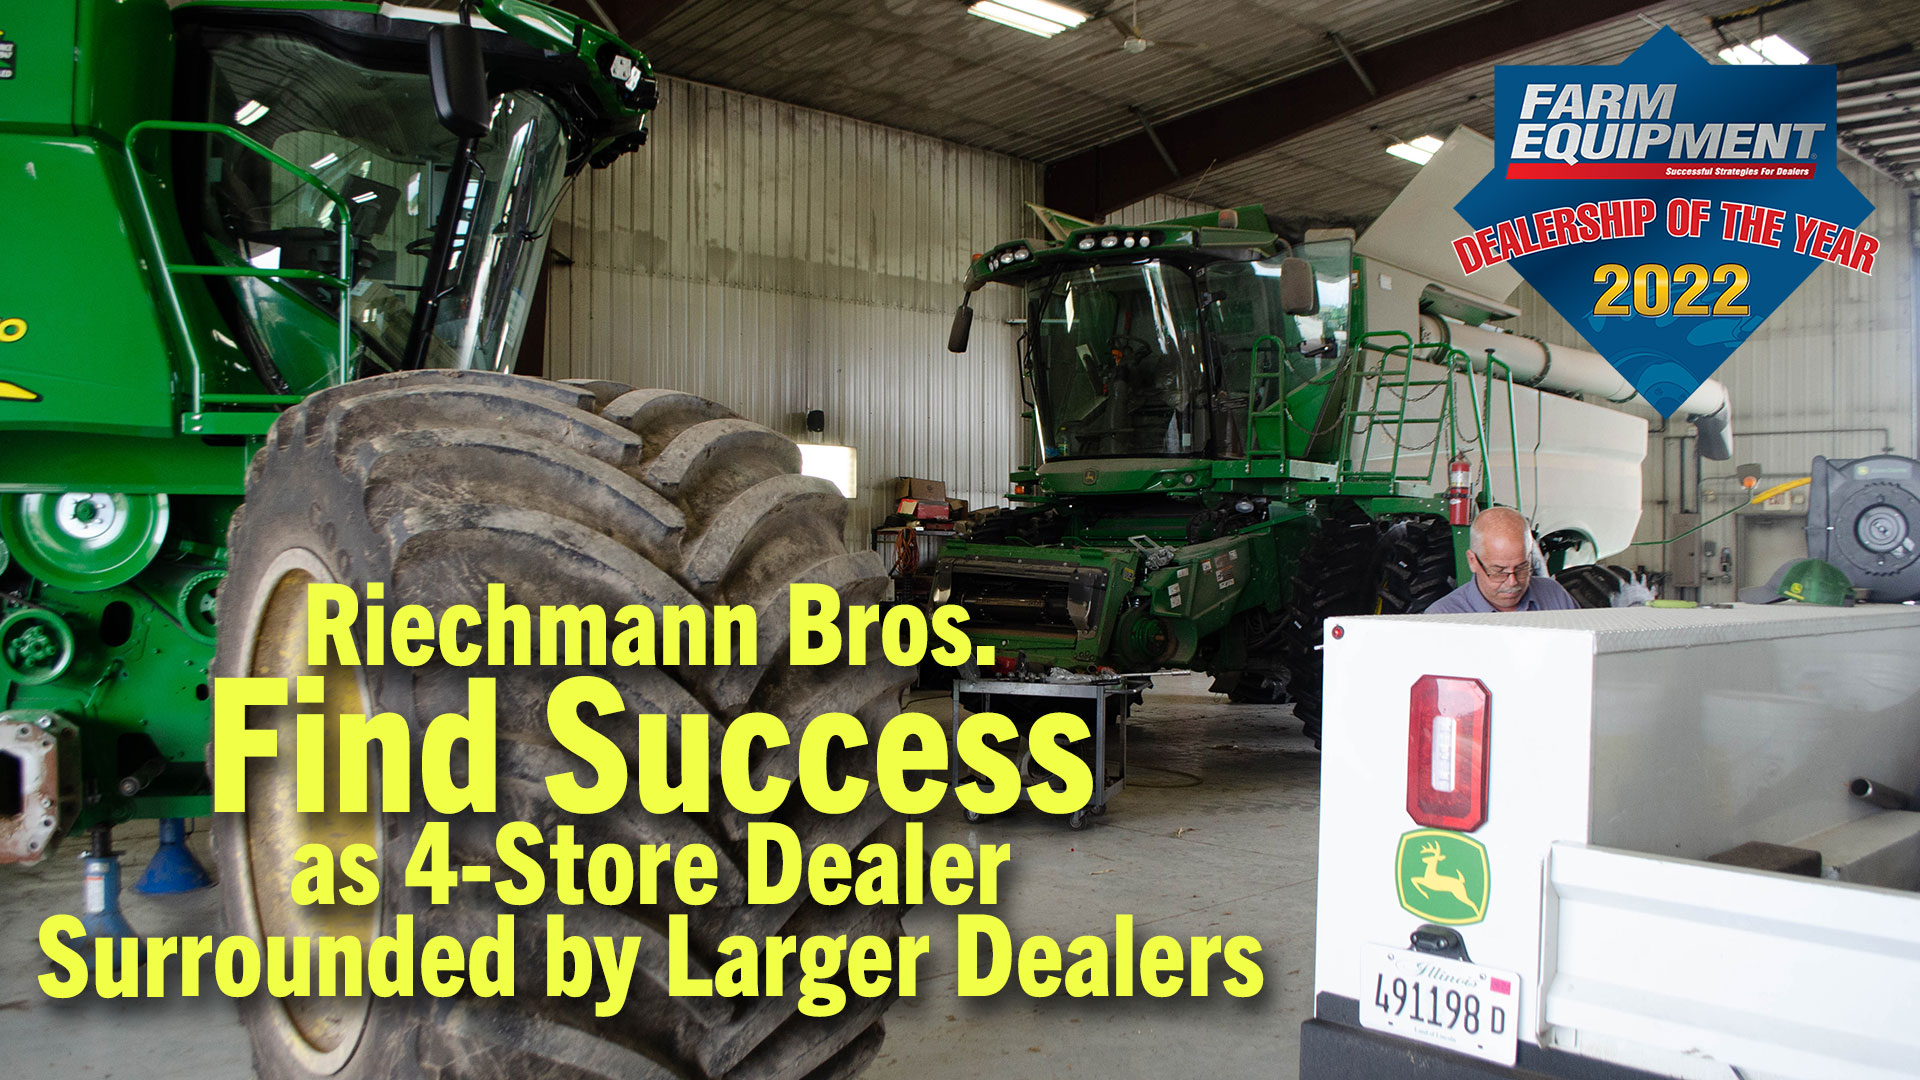 4-Riechmann-Bros-Find-Success-as-4-Store-Dealer-Surrounded-by-Larger-Dealers.jpg